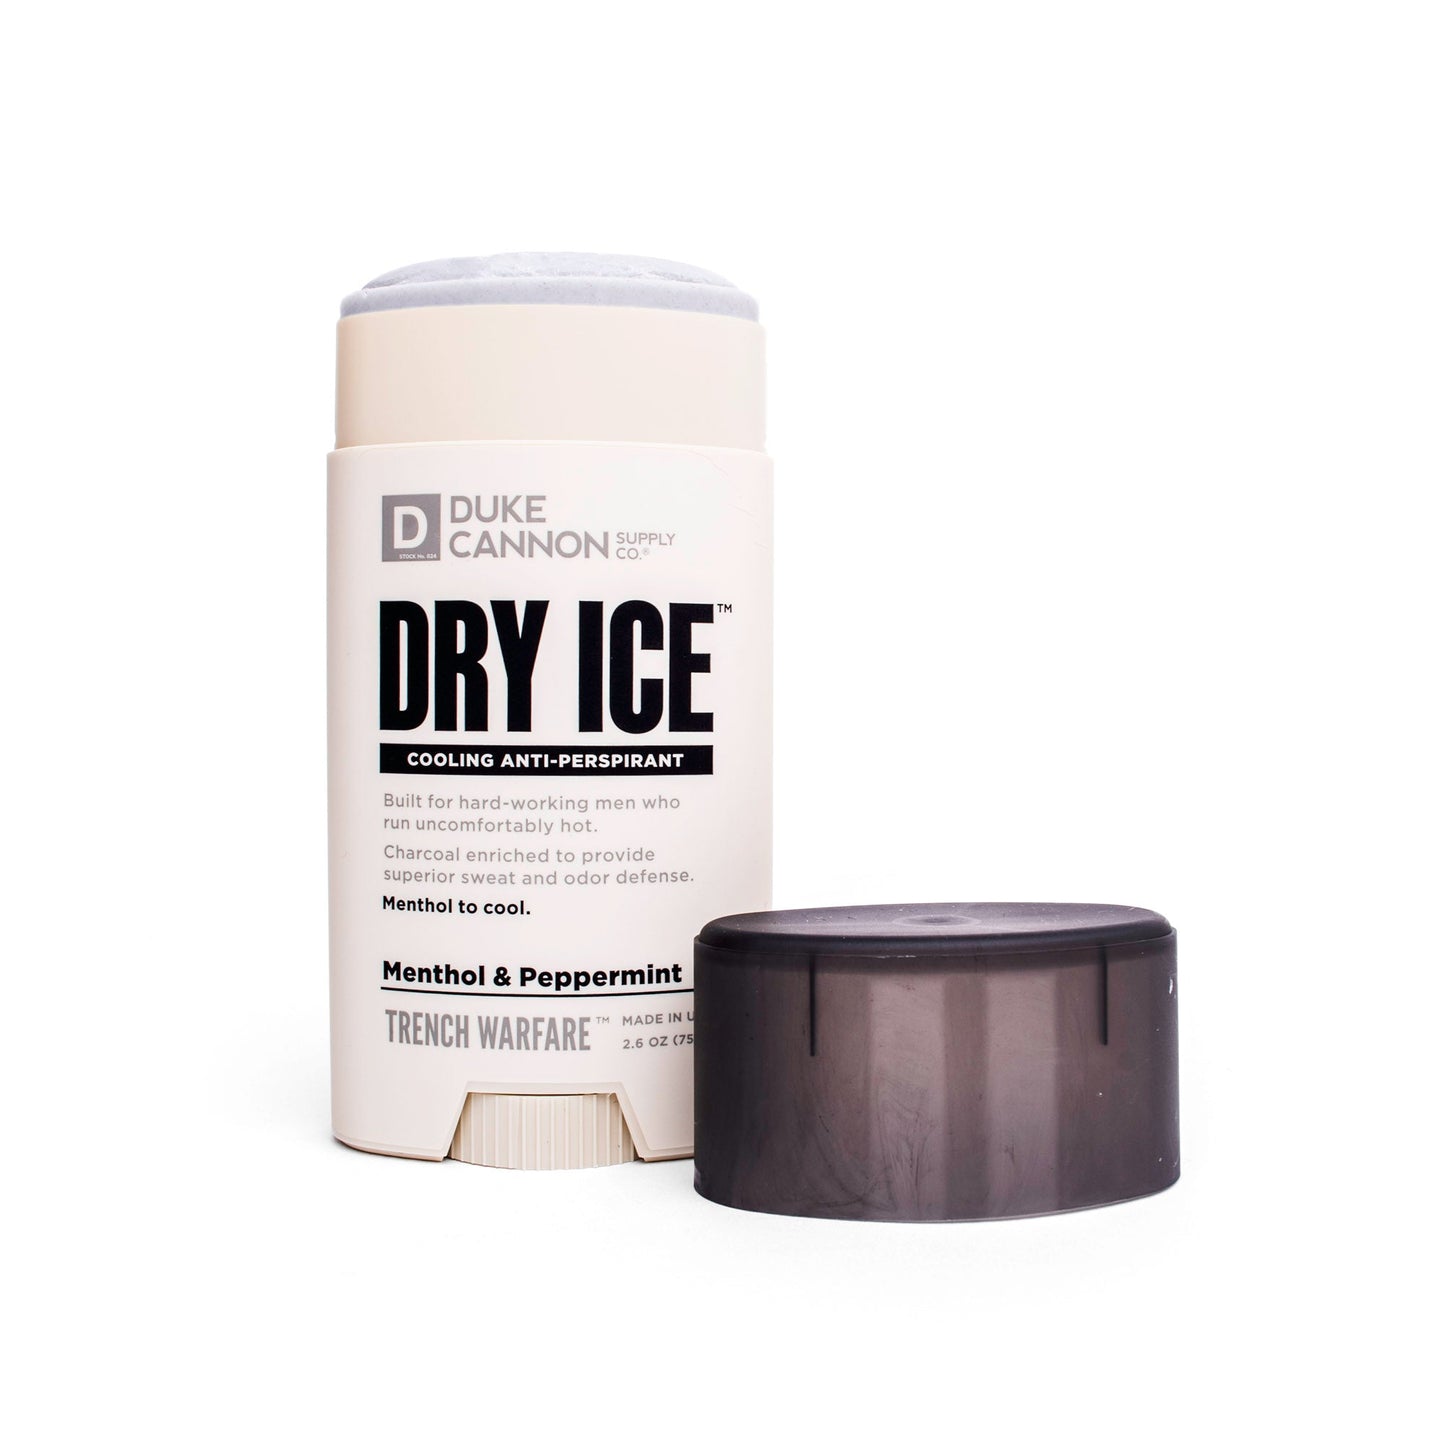 Dry Ice Cooling Anti-Perspirant